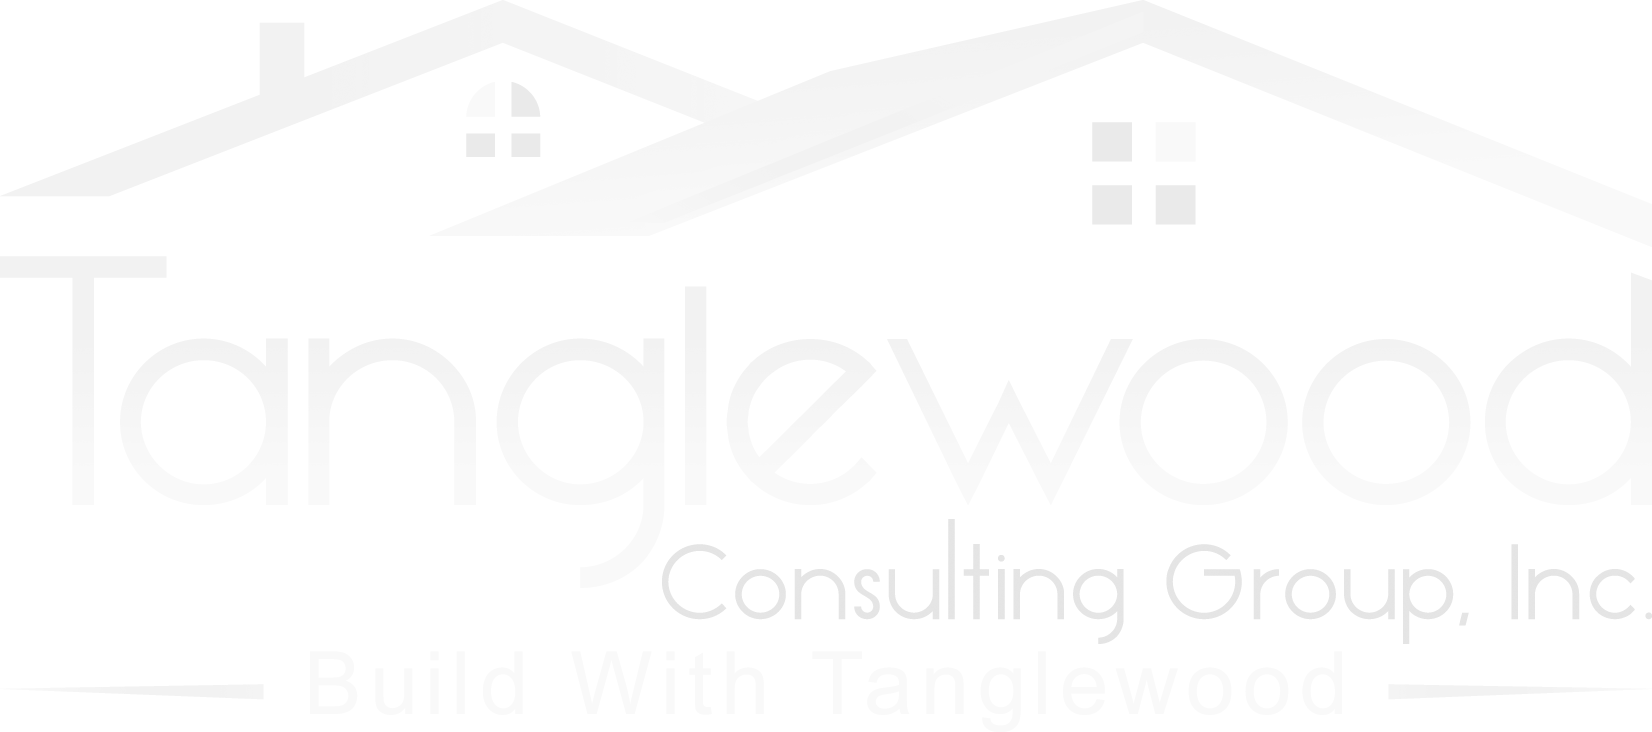 Tanglewood Consulting Group